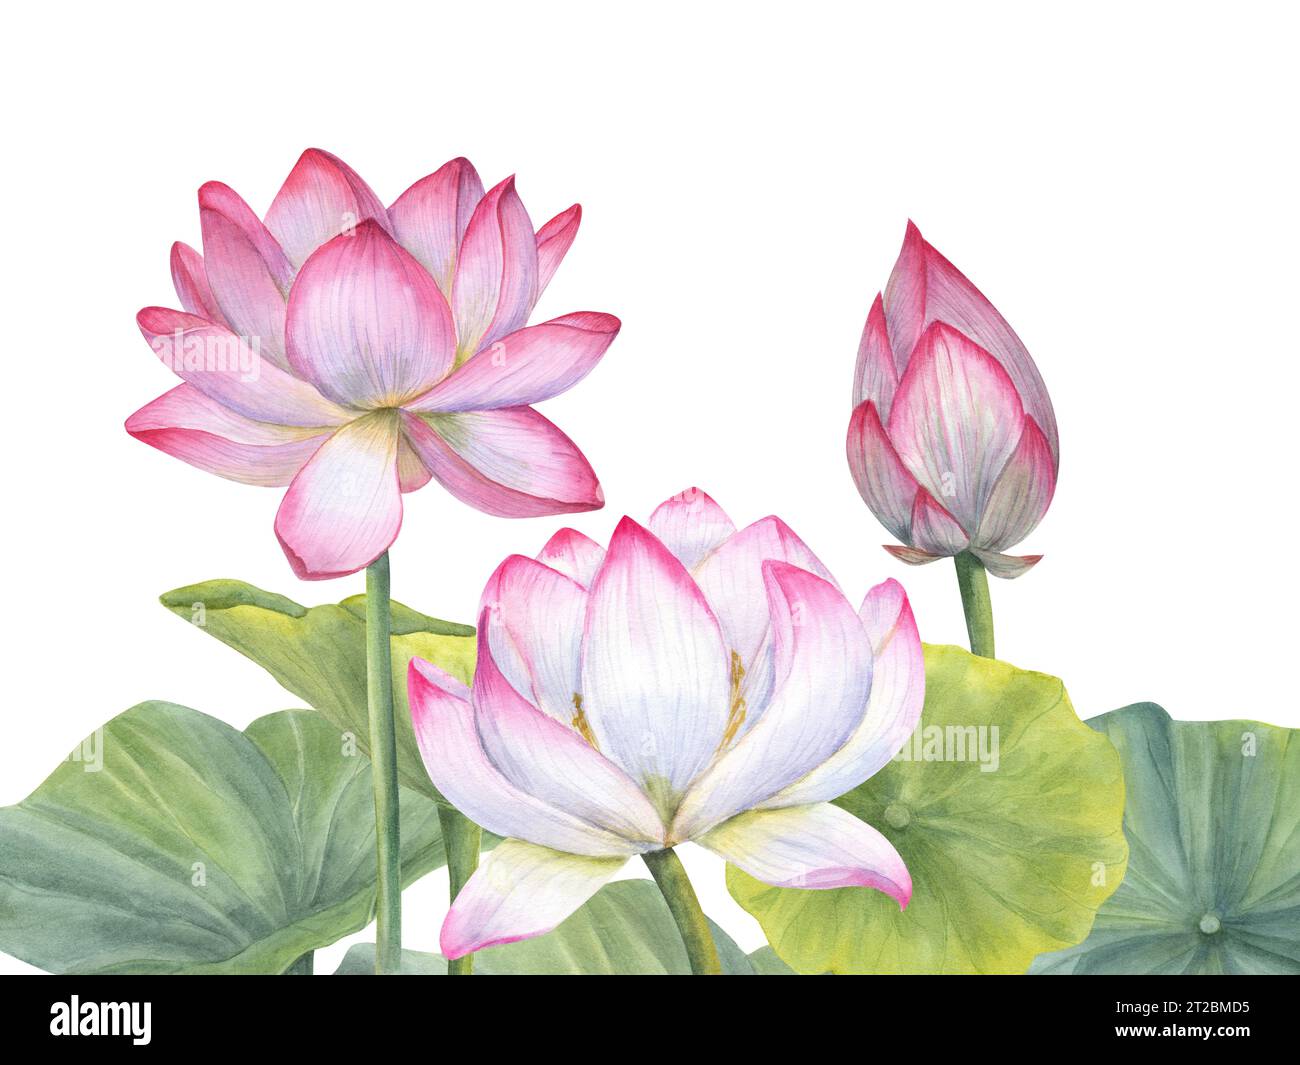 Composition with pink blooming Lotus Flowers. Water Lily, Indian Lotus, bud, leaves, stem. Watercolor illustration for cosmetic design, ayurveda Stock Photo